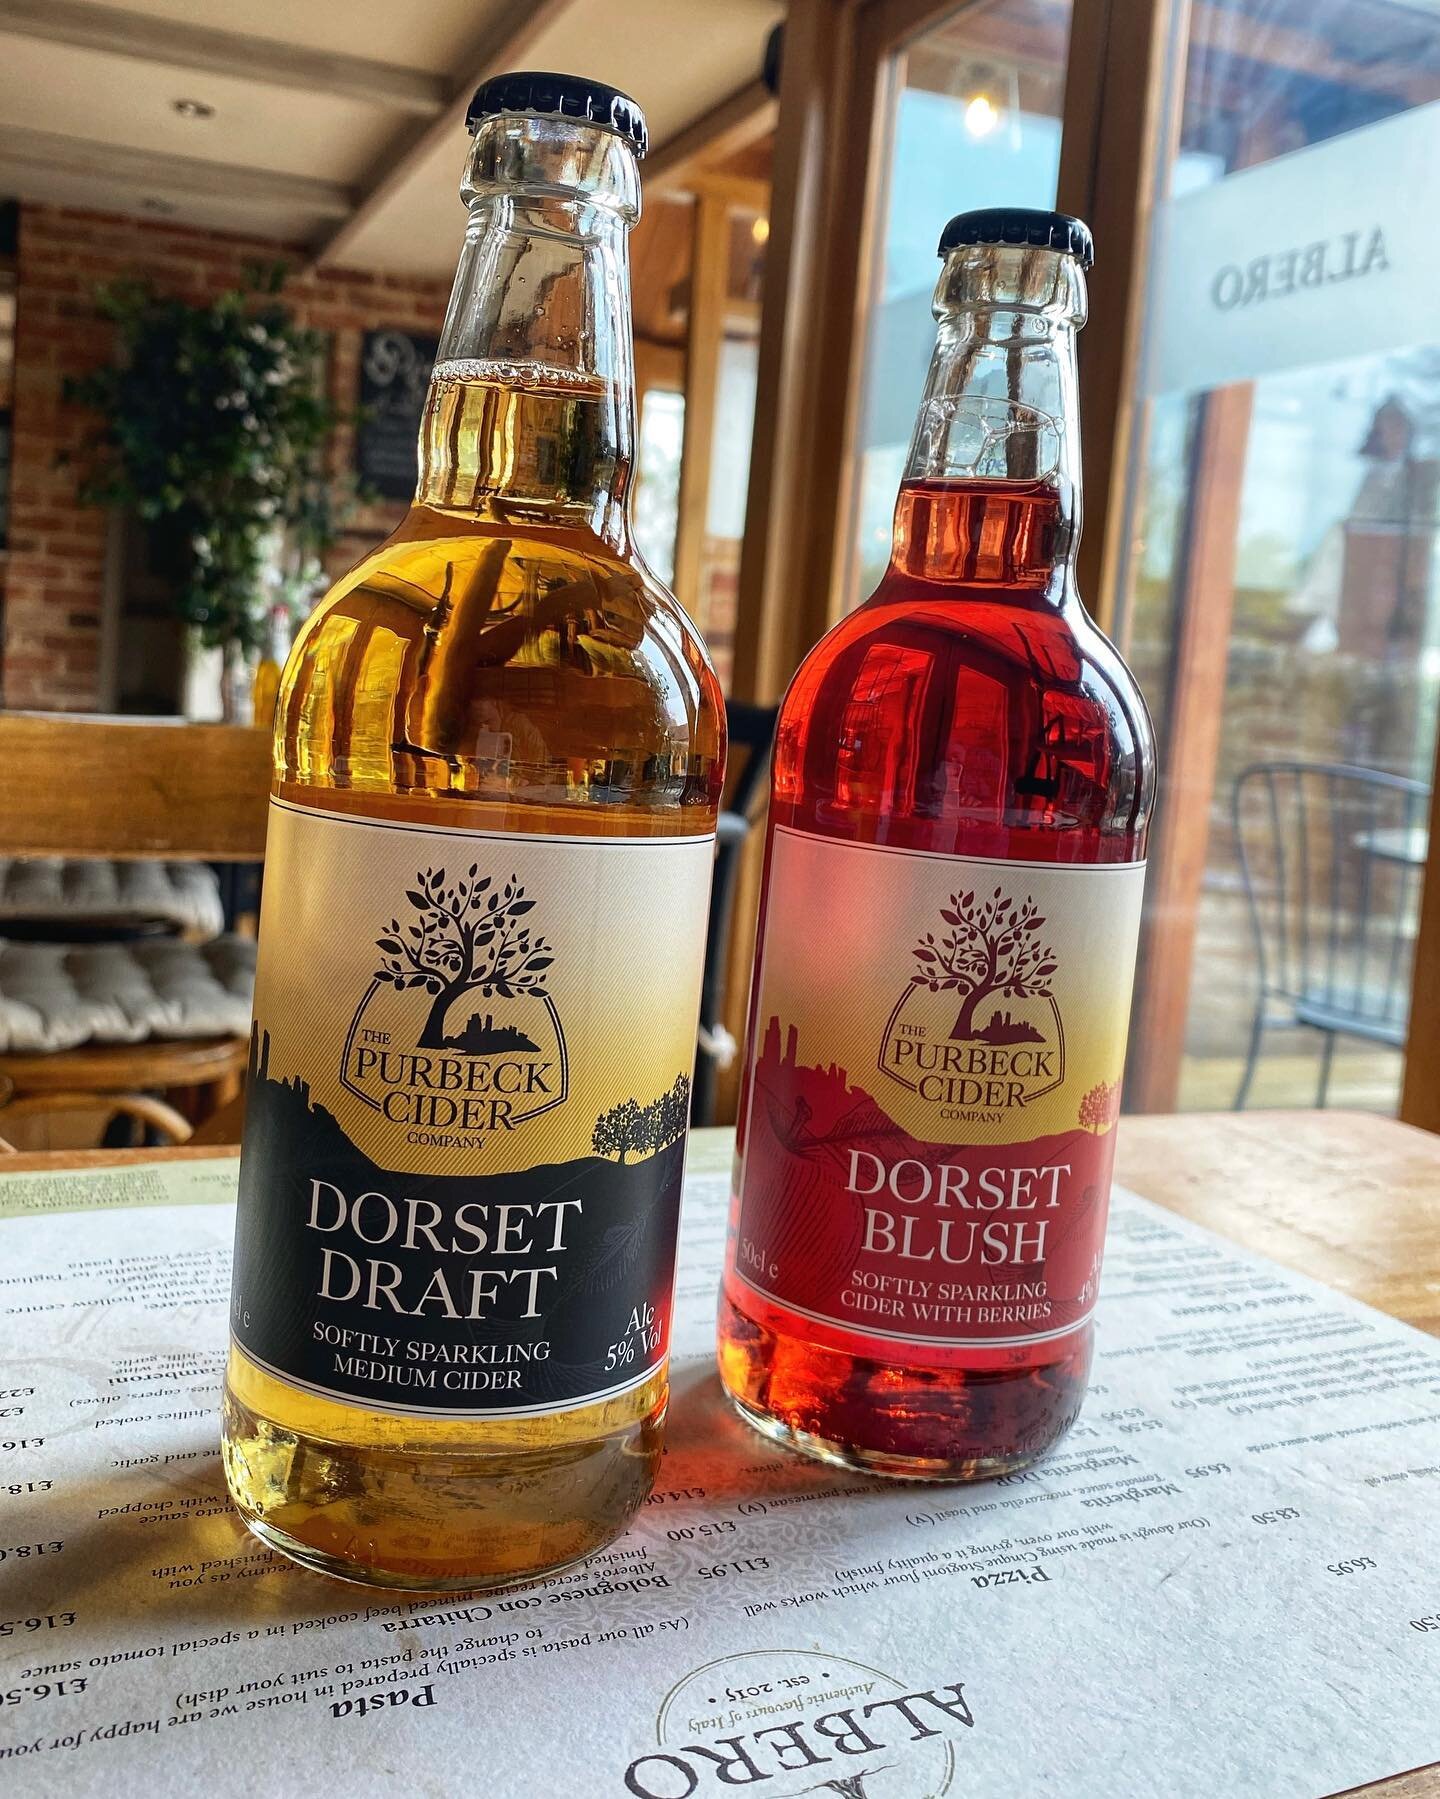 We are sooo exited about this ! 
We partnered up with @purbeckciderfarm and have this beauties on the menu now just in time for this glorious weather ☀️🍏🍺

Let me tell you this family of delicious ciders are all blended using 100% single pressed Br